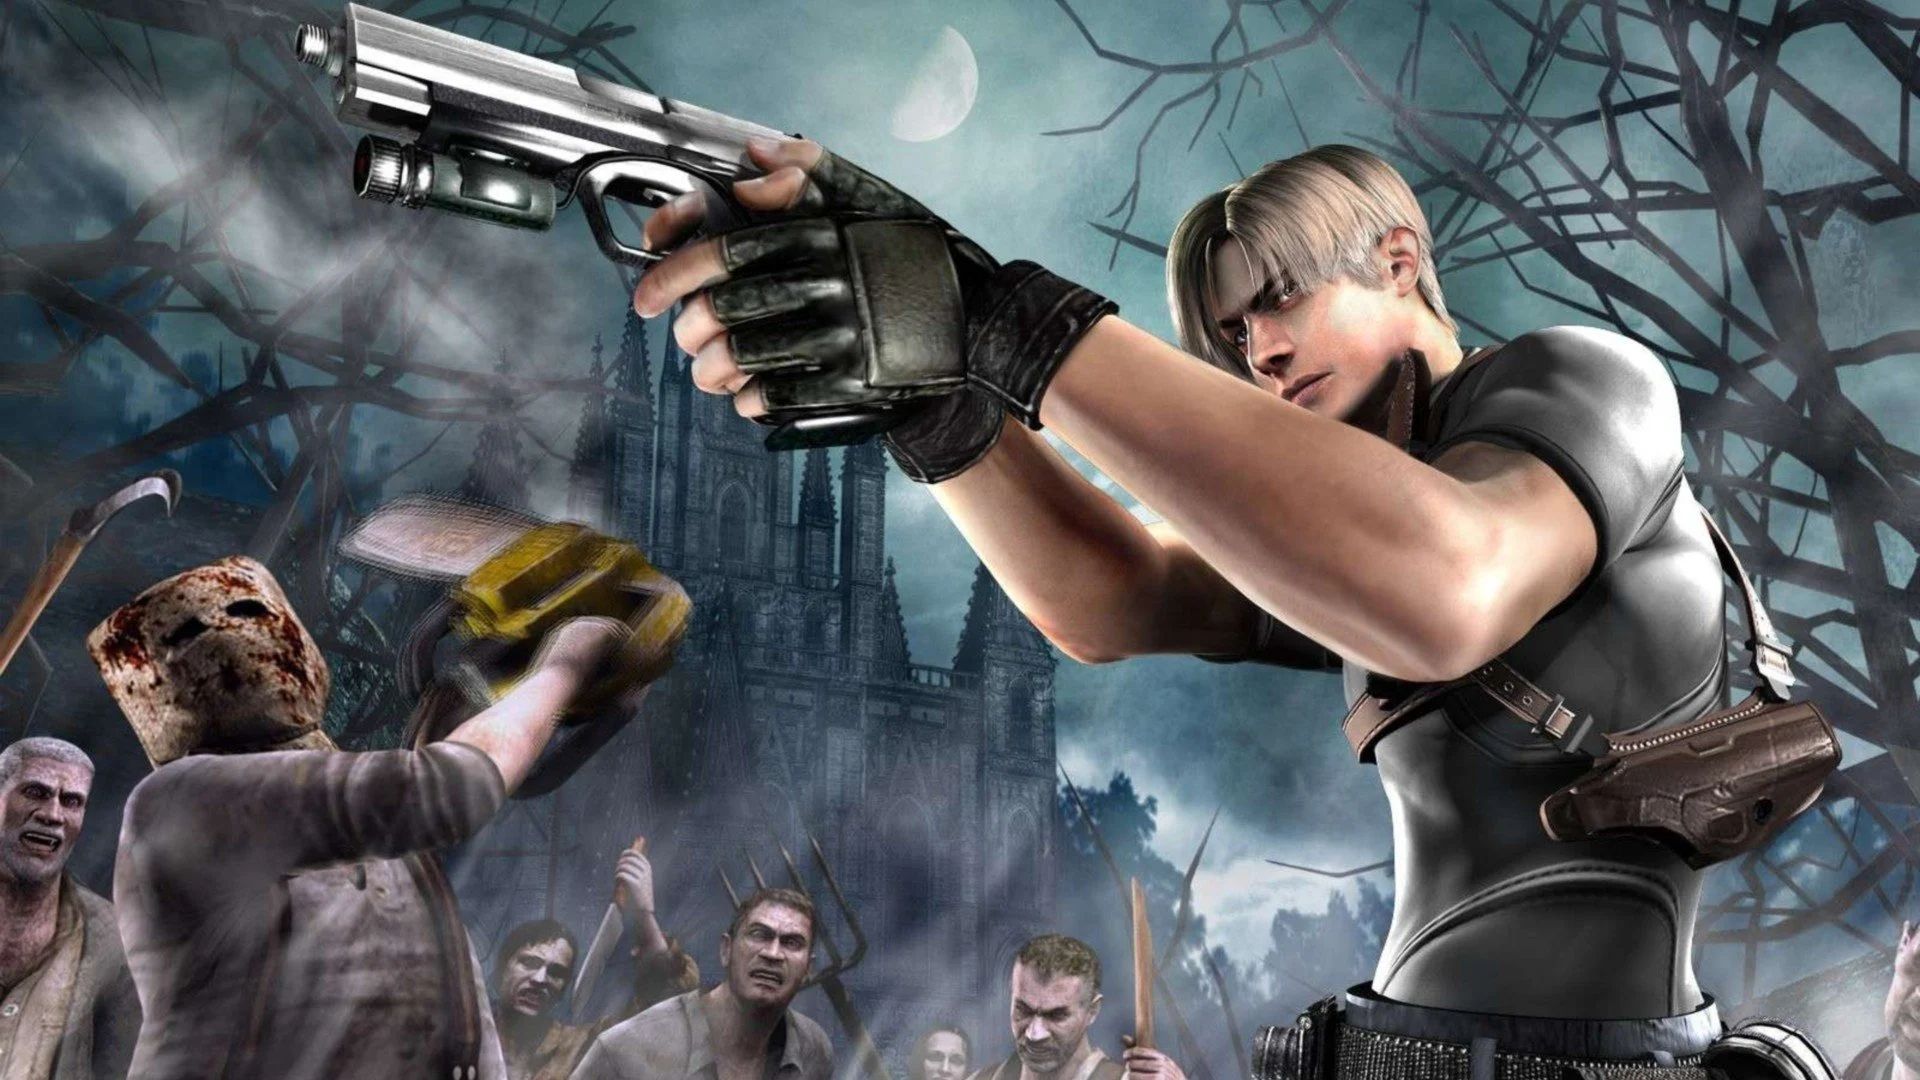 Capcom and PlayStation announced Resident Evil 4 Remake release date during today's State of Play broadcast.